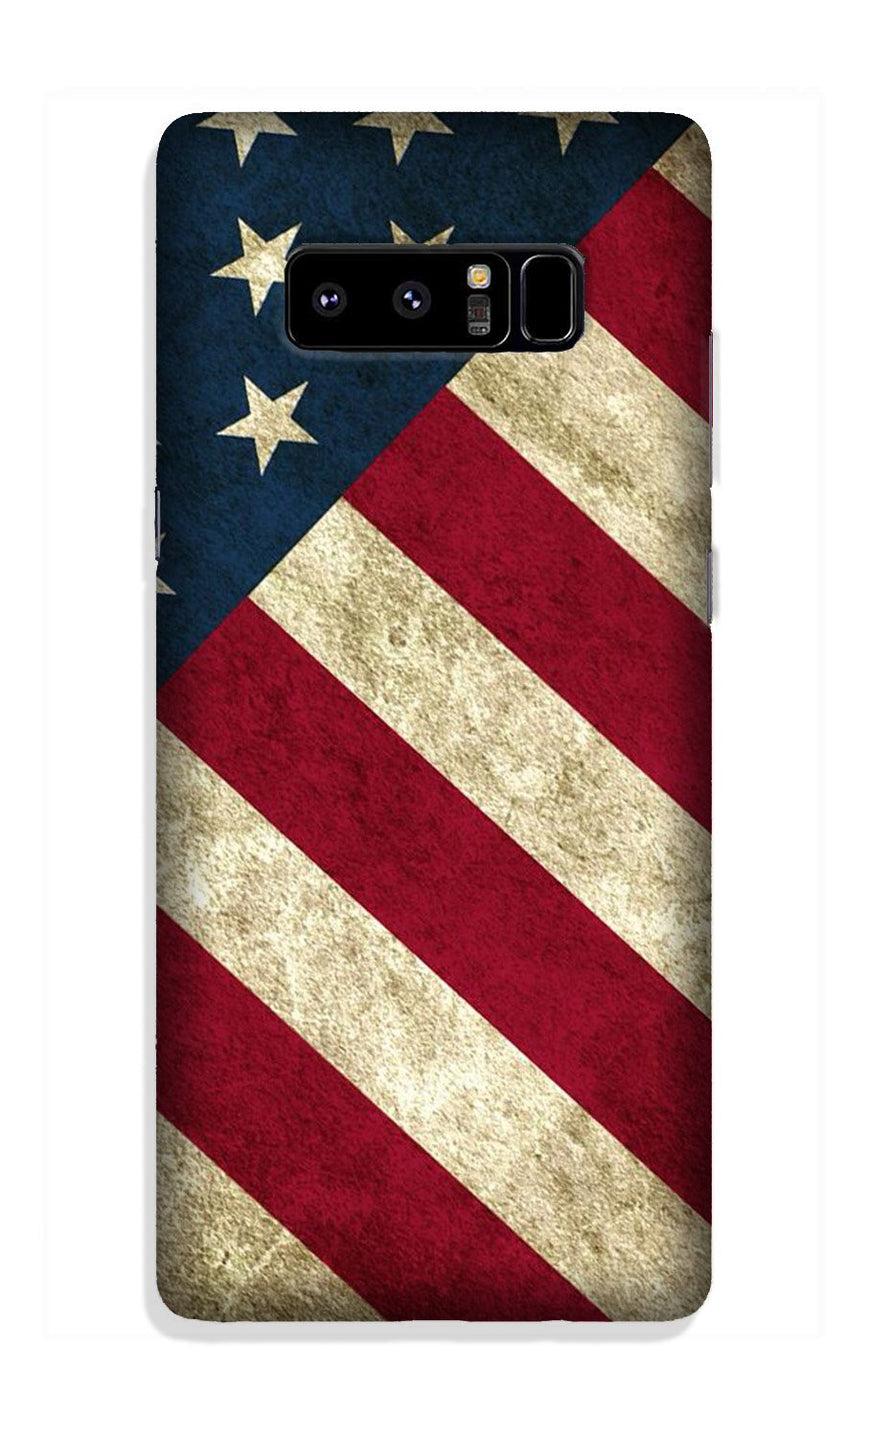 America Case for Galaxy Note 8